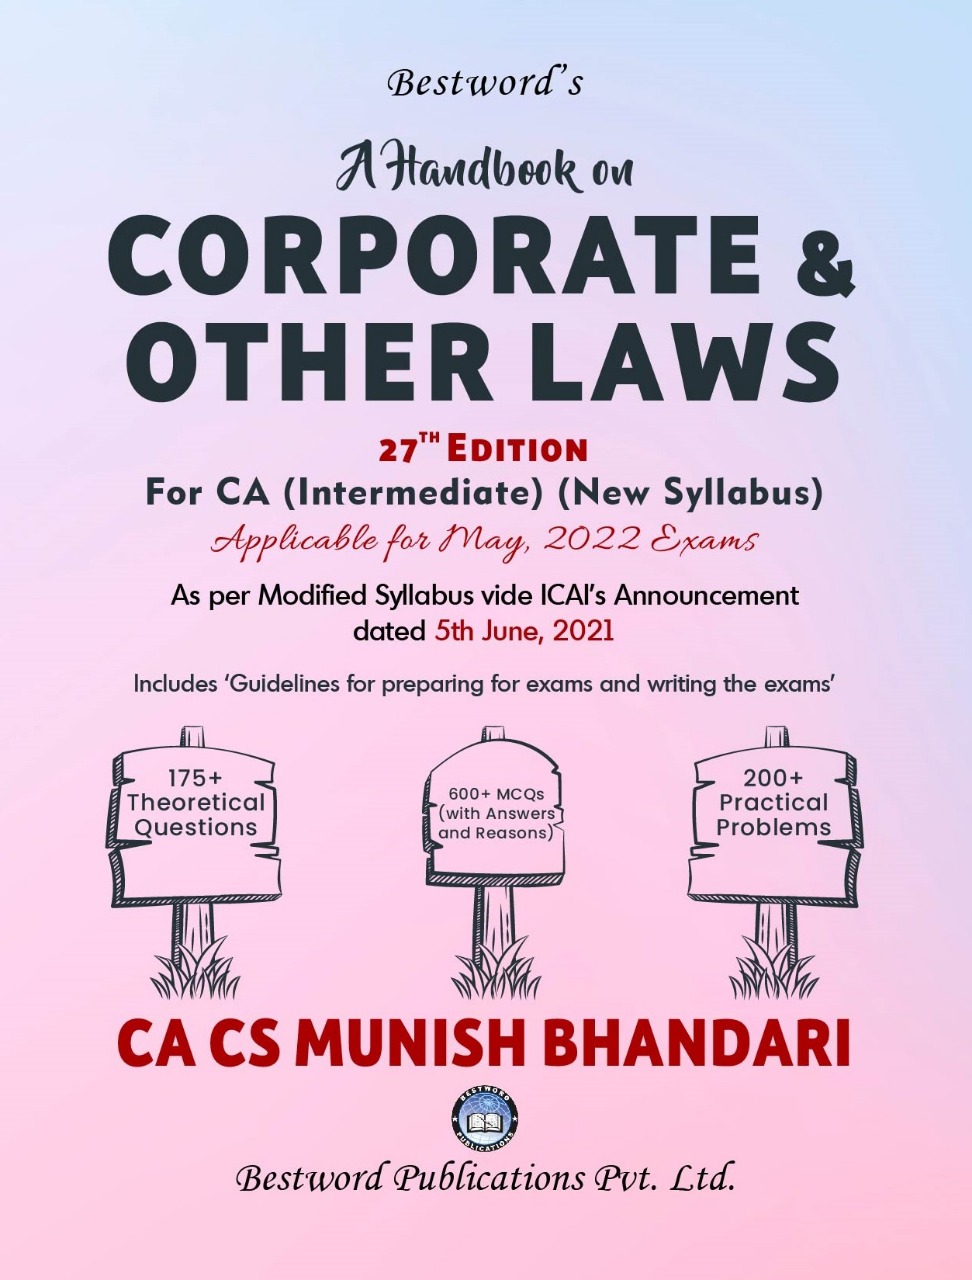 bestword's-a-handbook-on-corporate-and-other-laws---by-ca-cs-munish-bhandari---27th-edition---for-ca-(intermediate)-may-2022-exams-(new-syllabus)